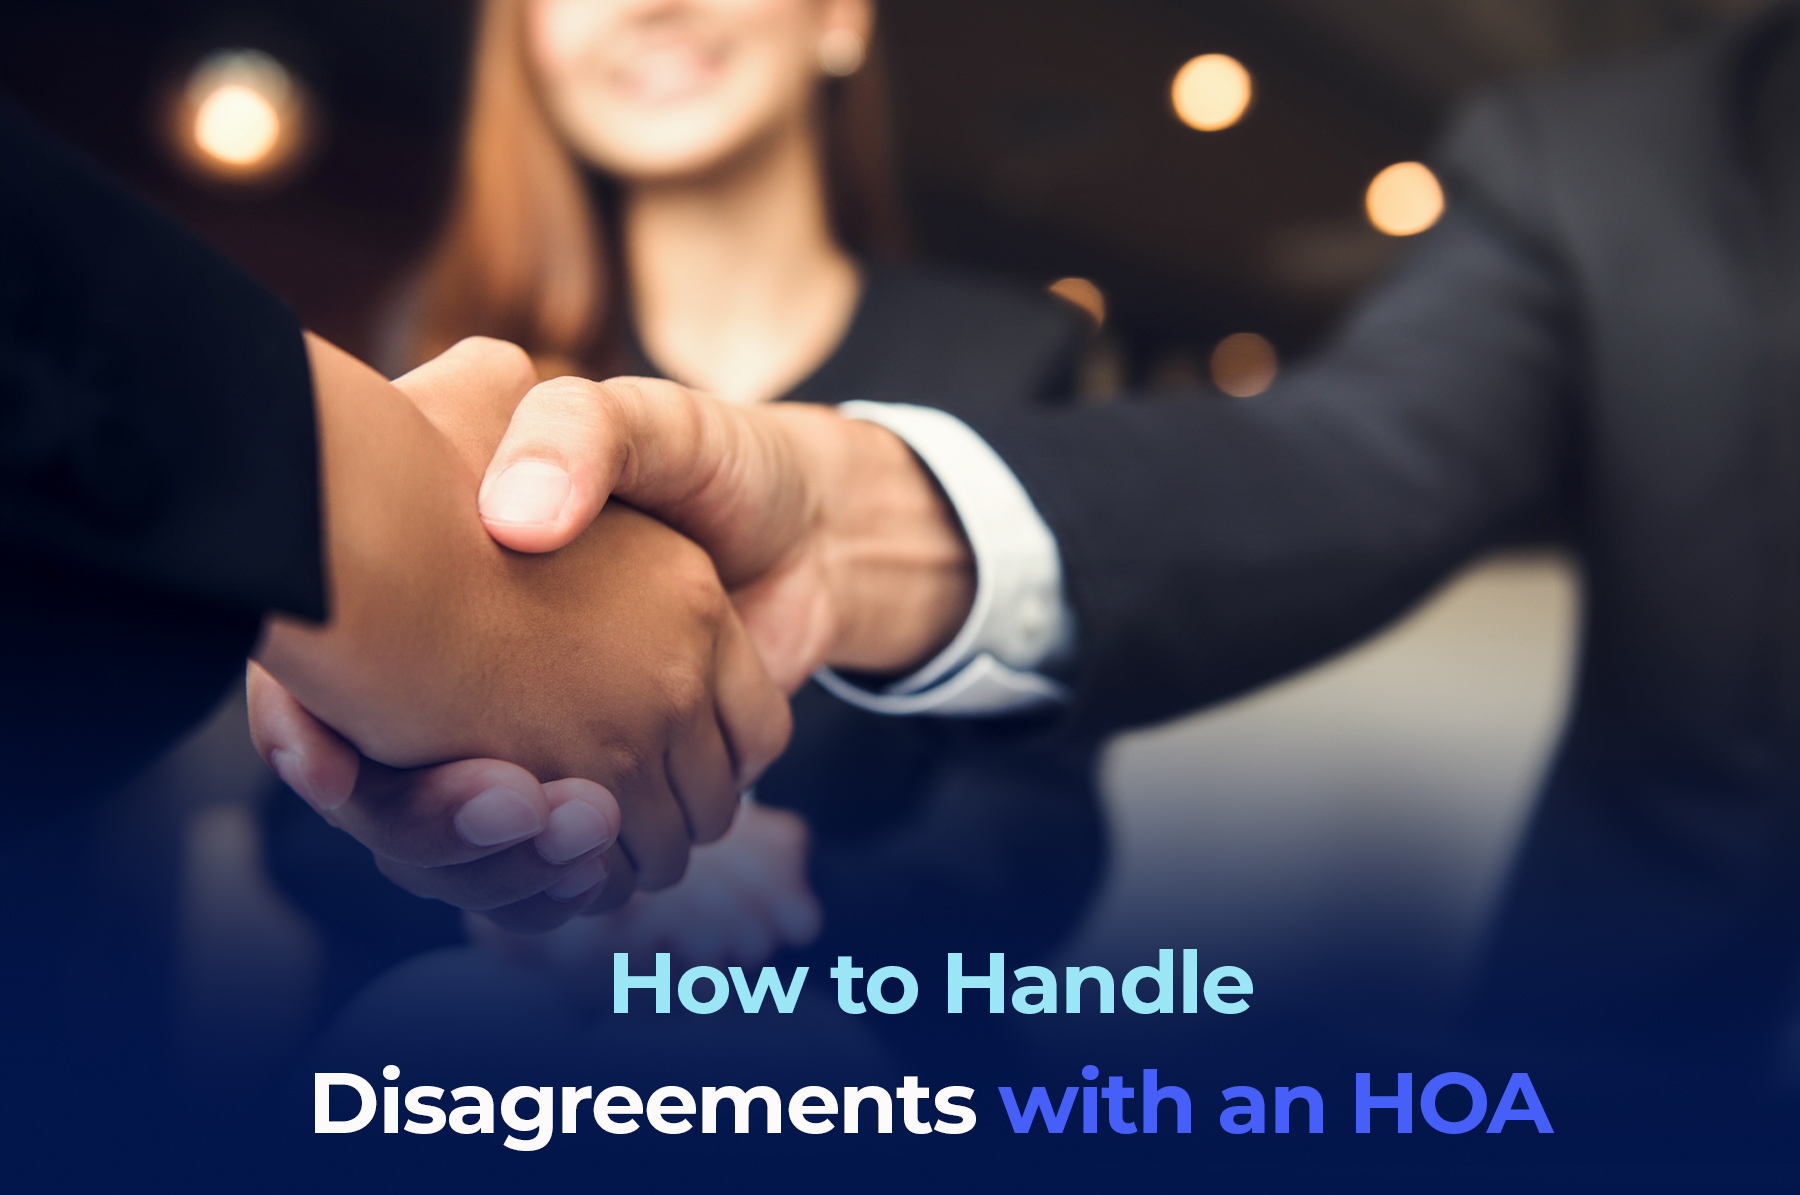 A picture of two man shaking hands and a woman smiling looking at them. The phrase in the bottom is "How to Handle Disagreements with an HOA"